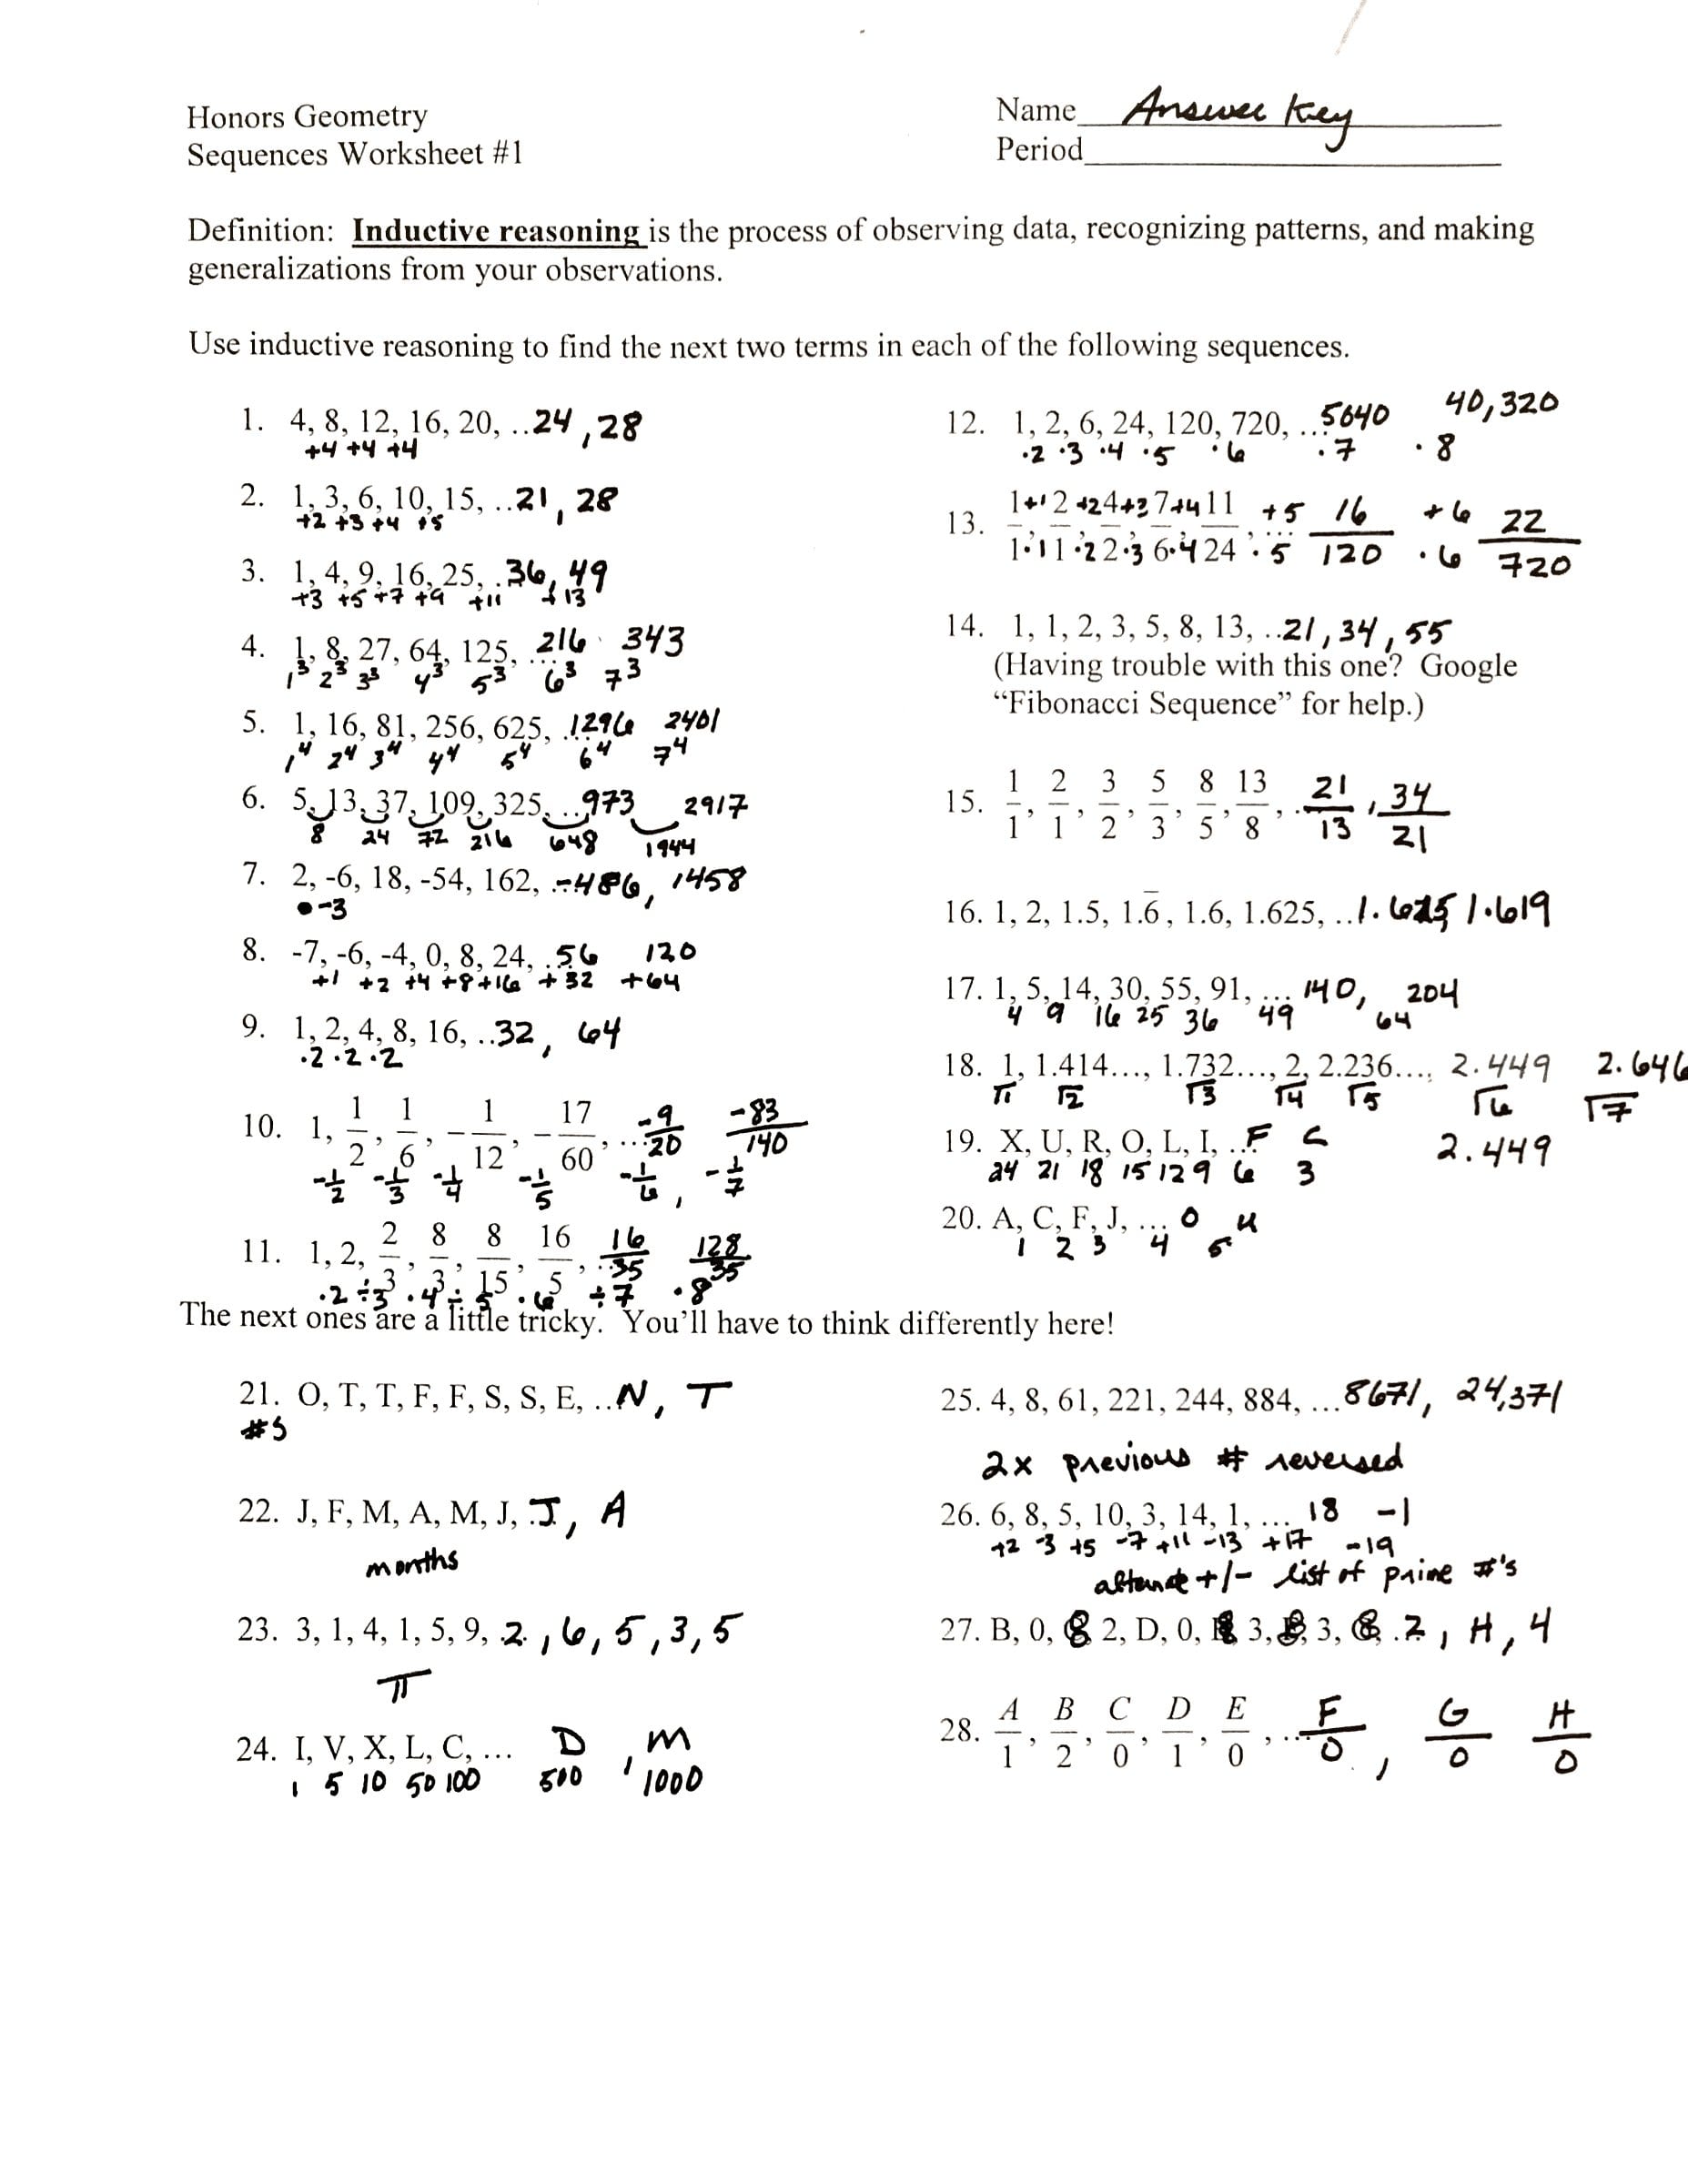 Arithmetic Sequences Worksheets The Best Worksheets Image Collection Or Arithmetic Sequences Worksheet 1 Answer Key